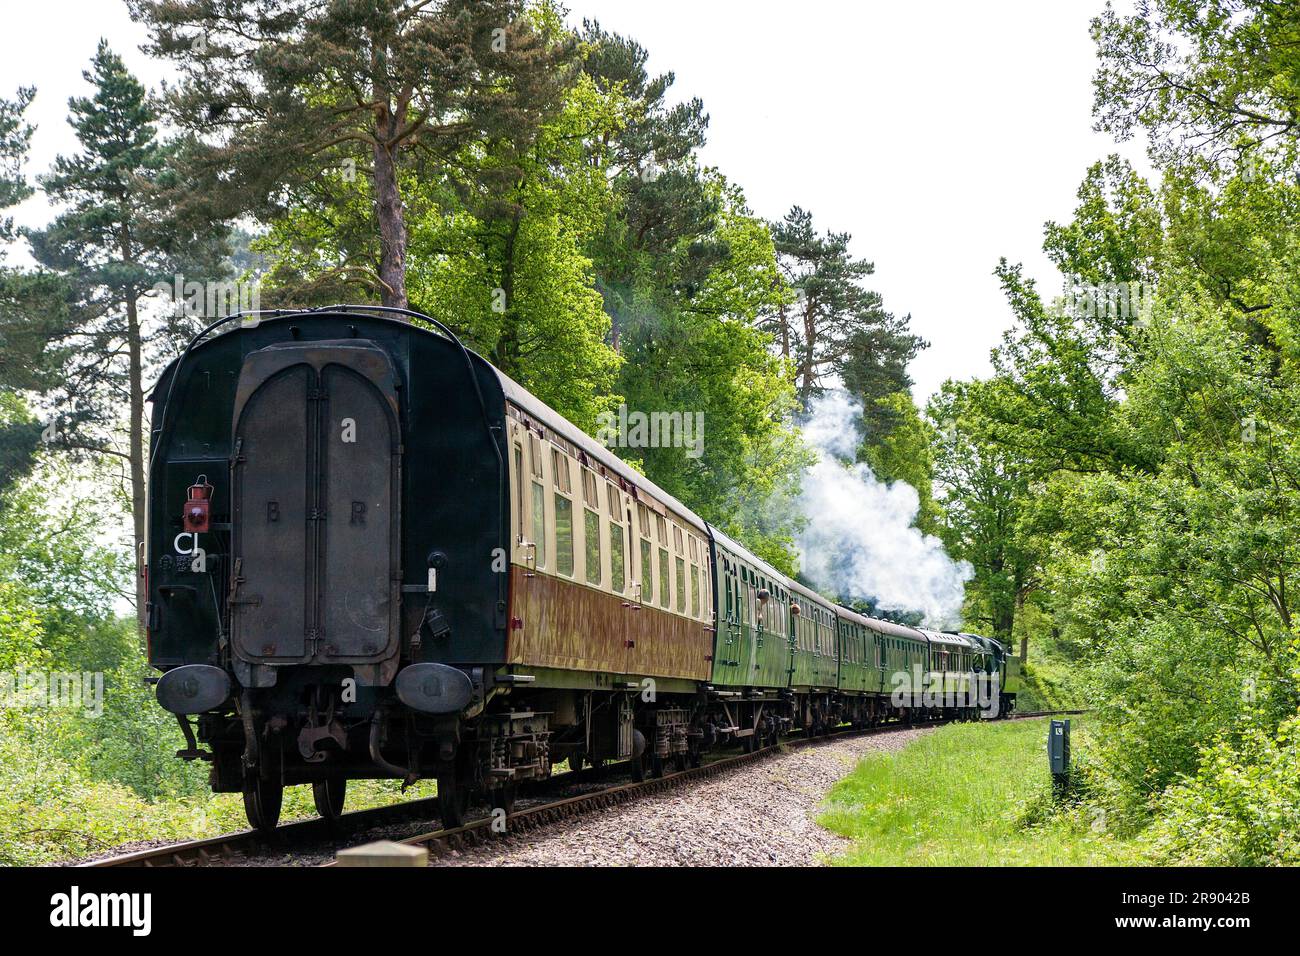 KINGSCOTE, SUSSEX/UK - MAY 23 : Rebuilt Bulleid Light Pacific No. 34059 steam locomotive near Kingscote Station on May 23, 2009. Three unidentified Stock Photo